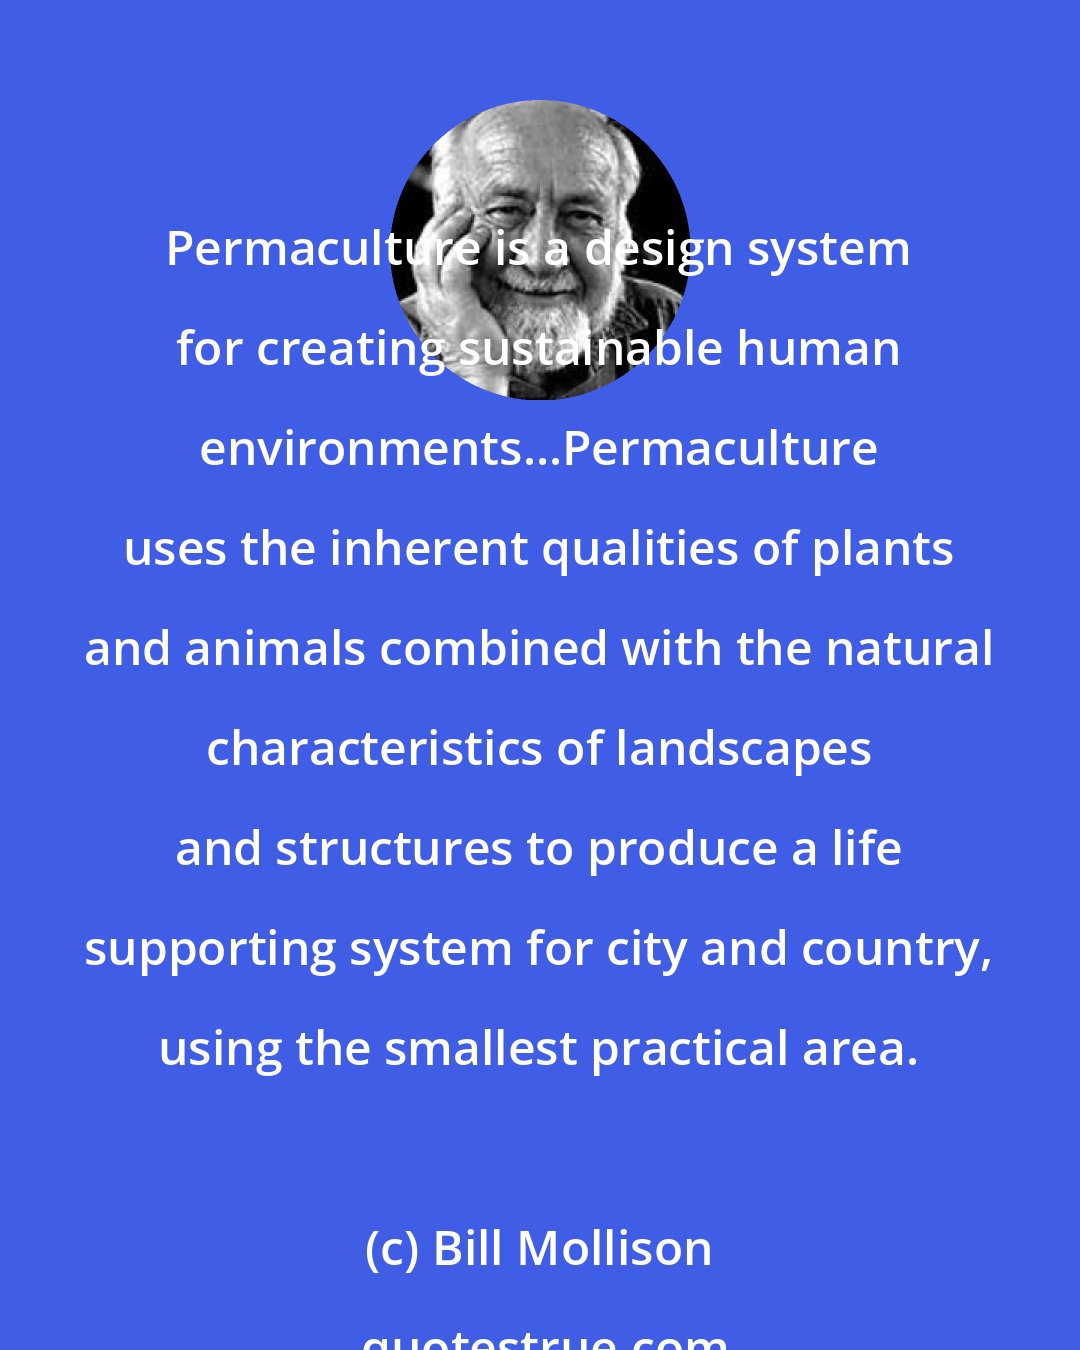 Bill Mollison: Permaculture is a design system for creating sustainable human environments...Permaculture uses the inherent qualities of plants and animals combined with the natural characteristics of landscapes and structures to produce a life supporting system for city and country, using the smallest practical area.